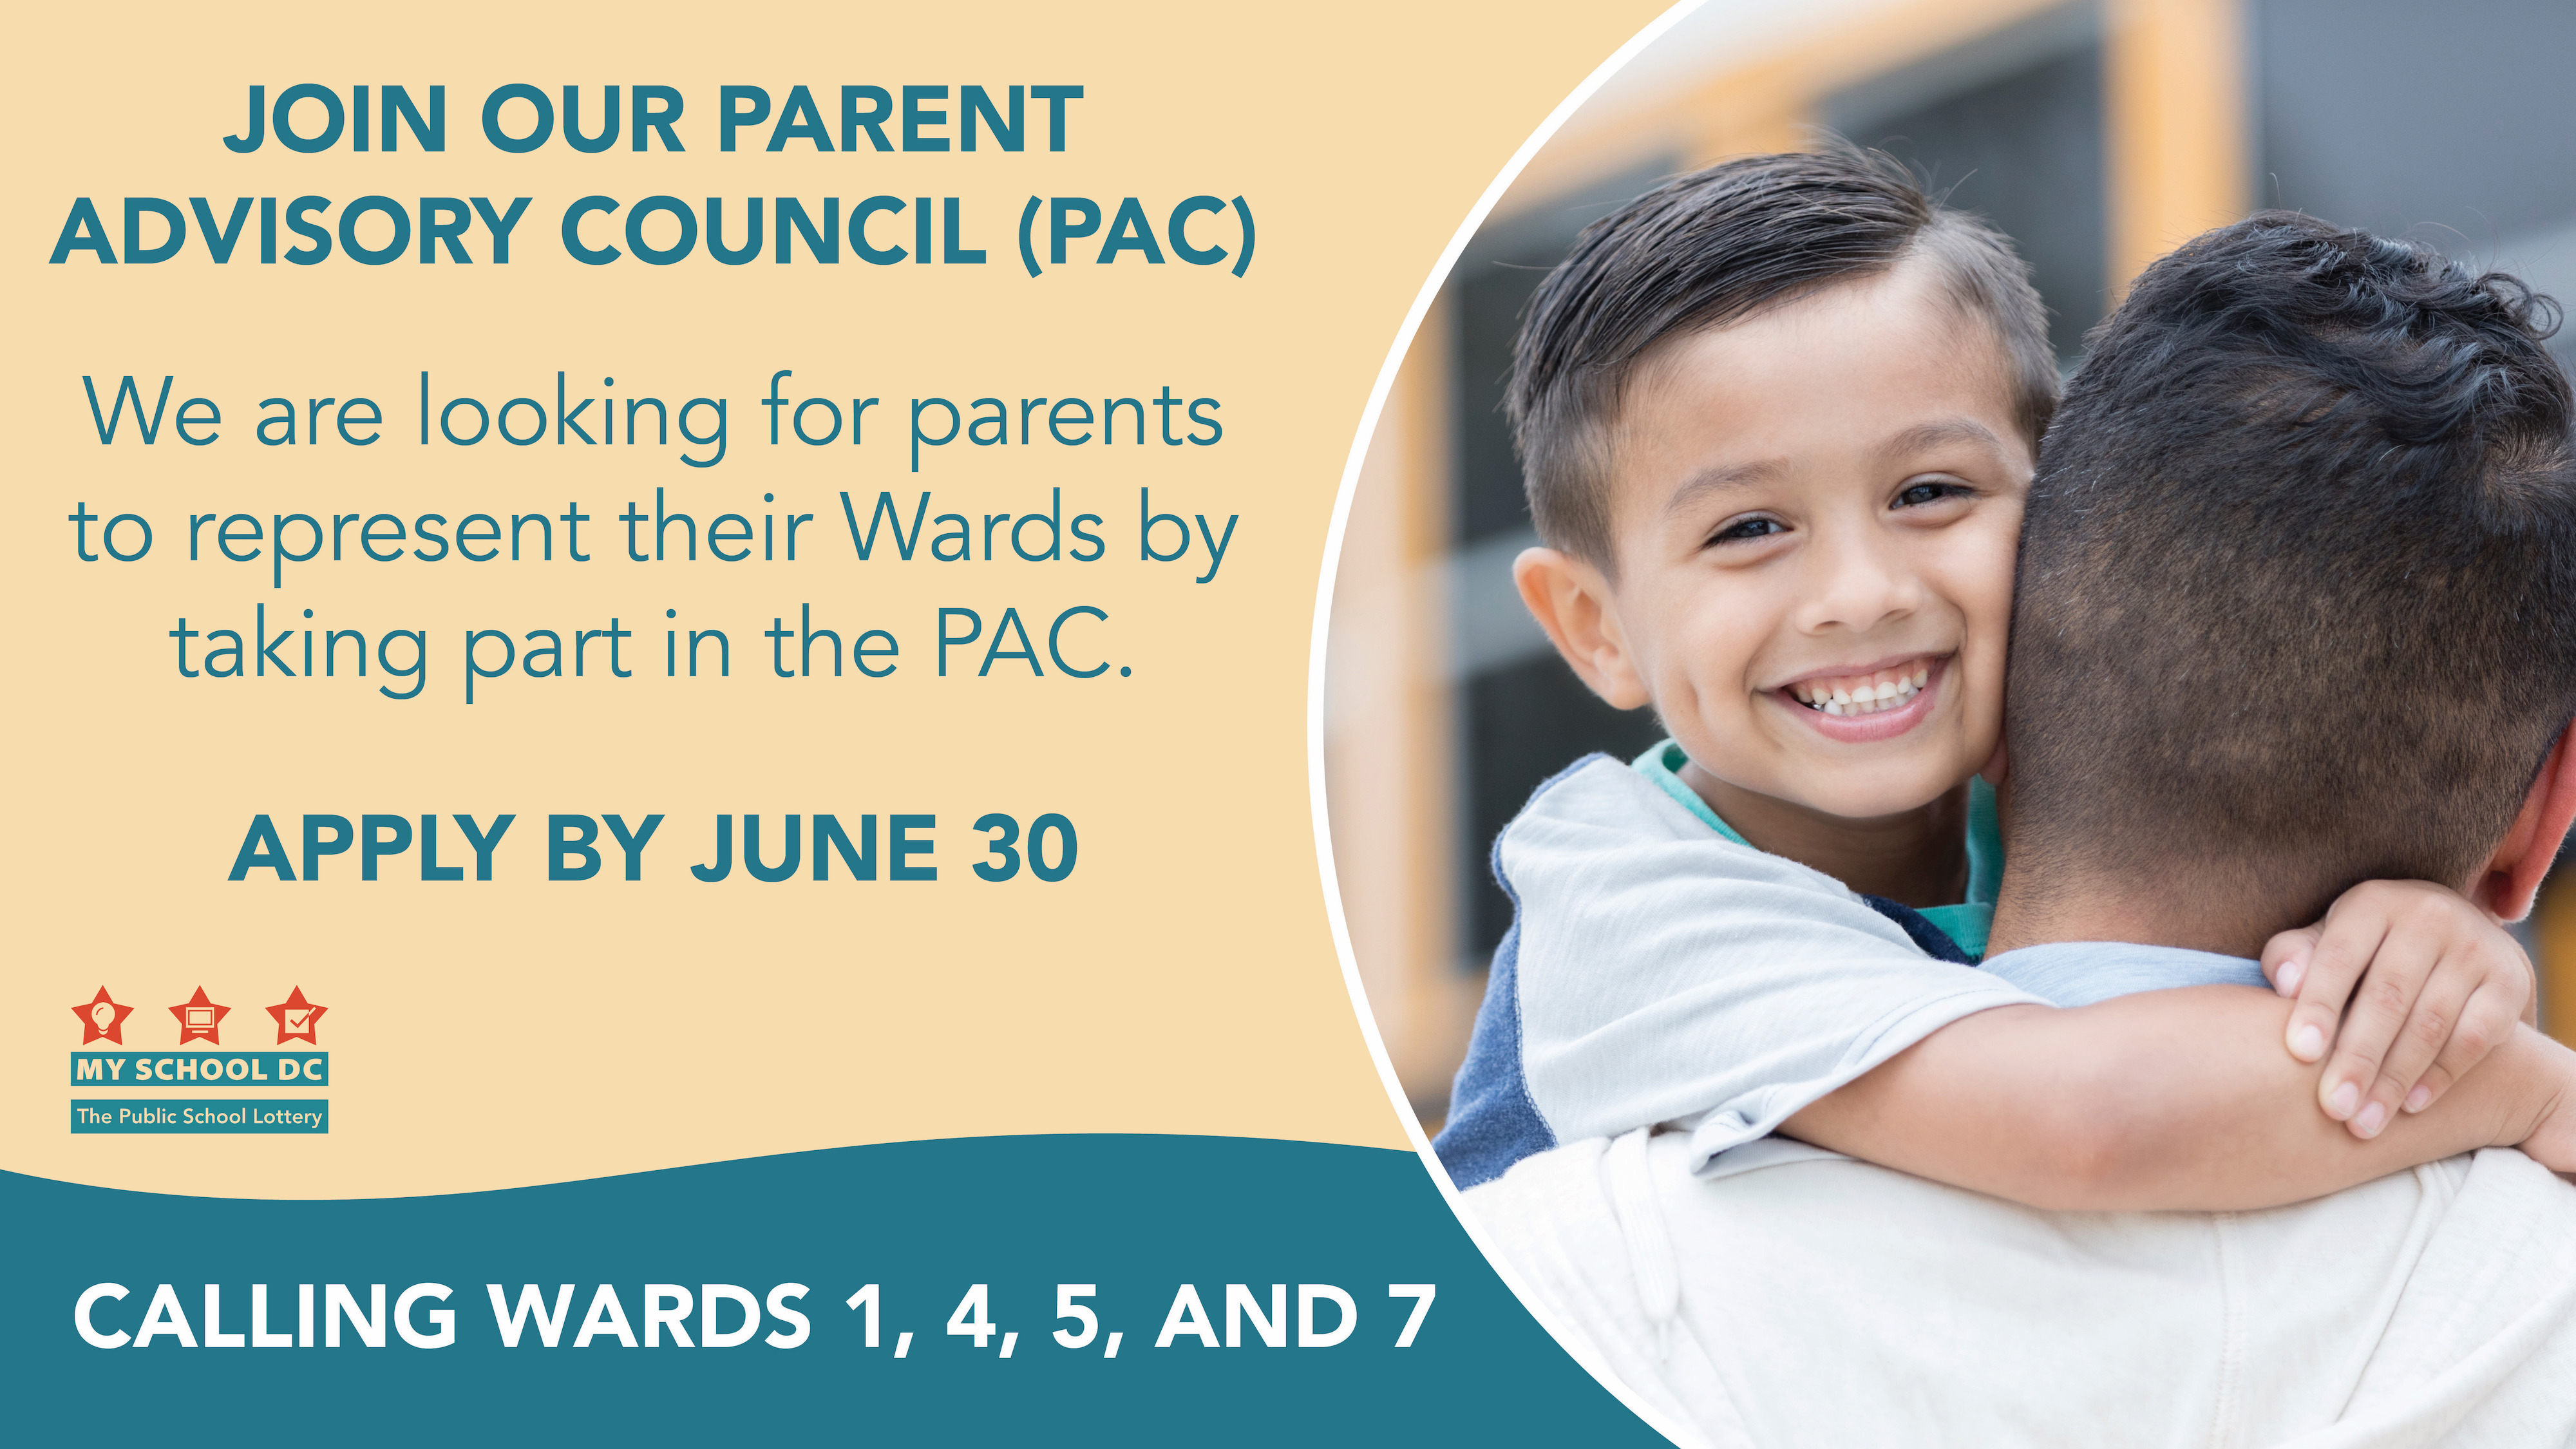 Smiling child with arms wrapped around parent. Join our parent advisory council. Apply by June 30